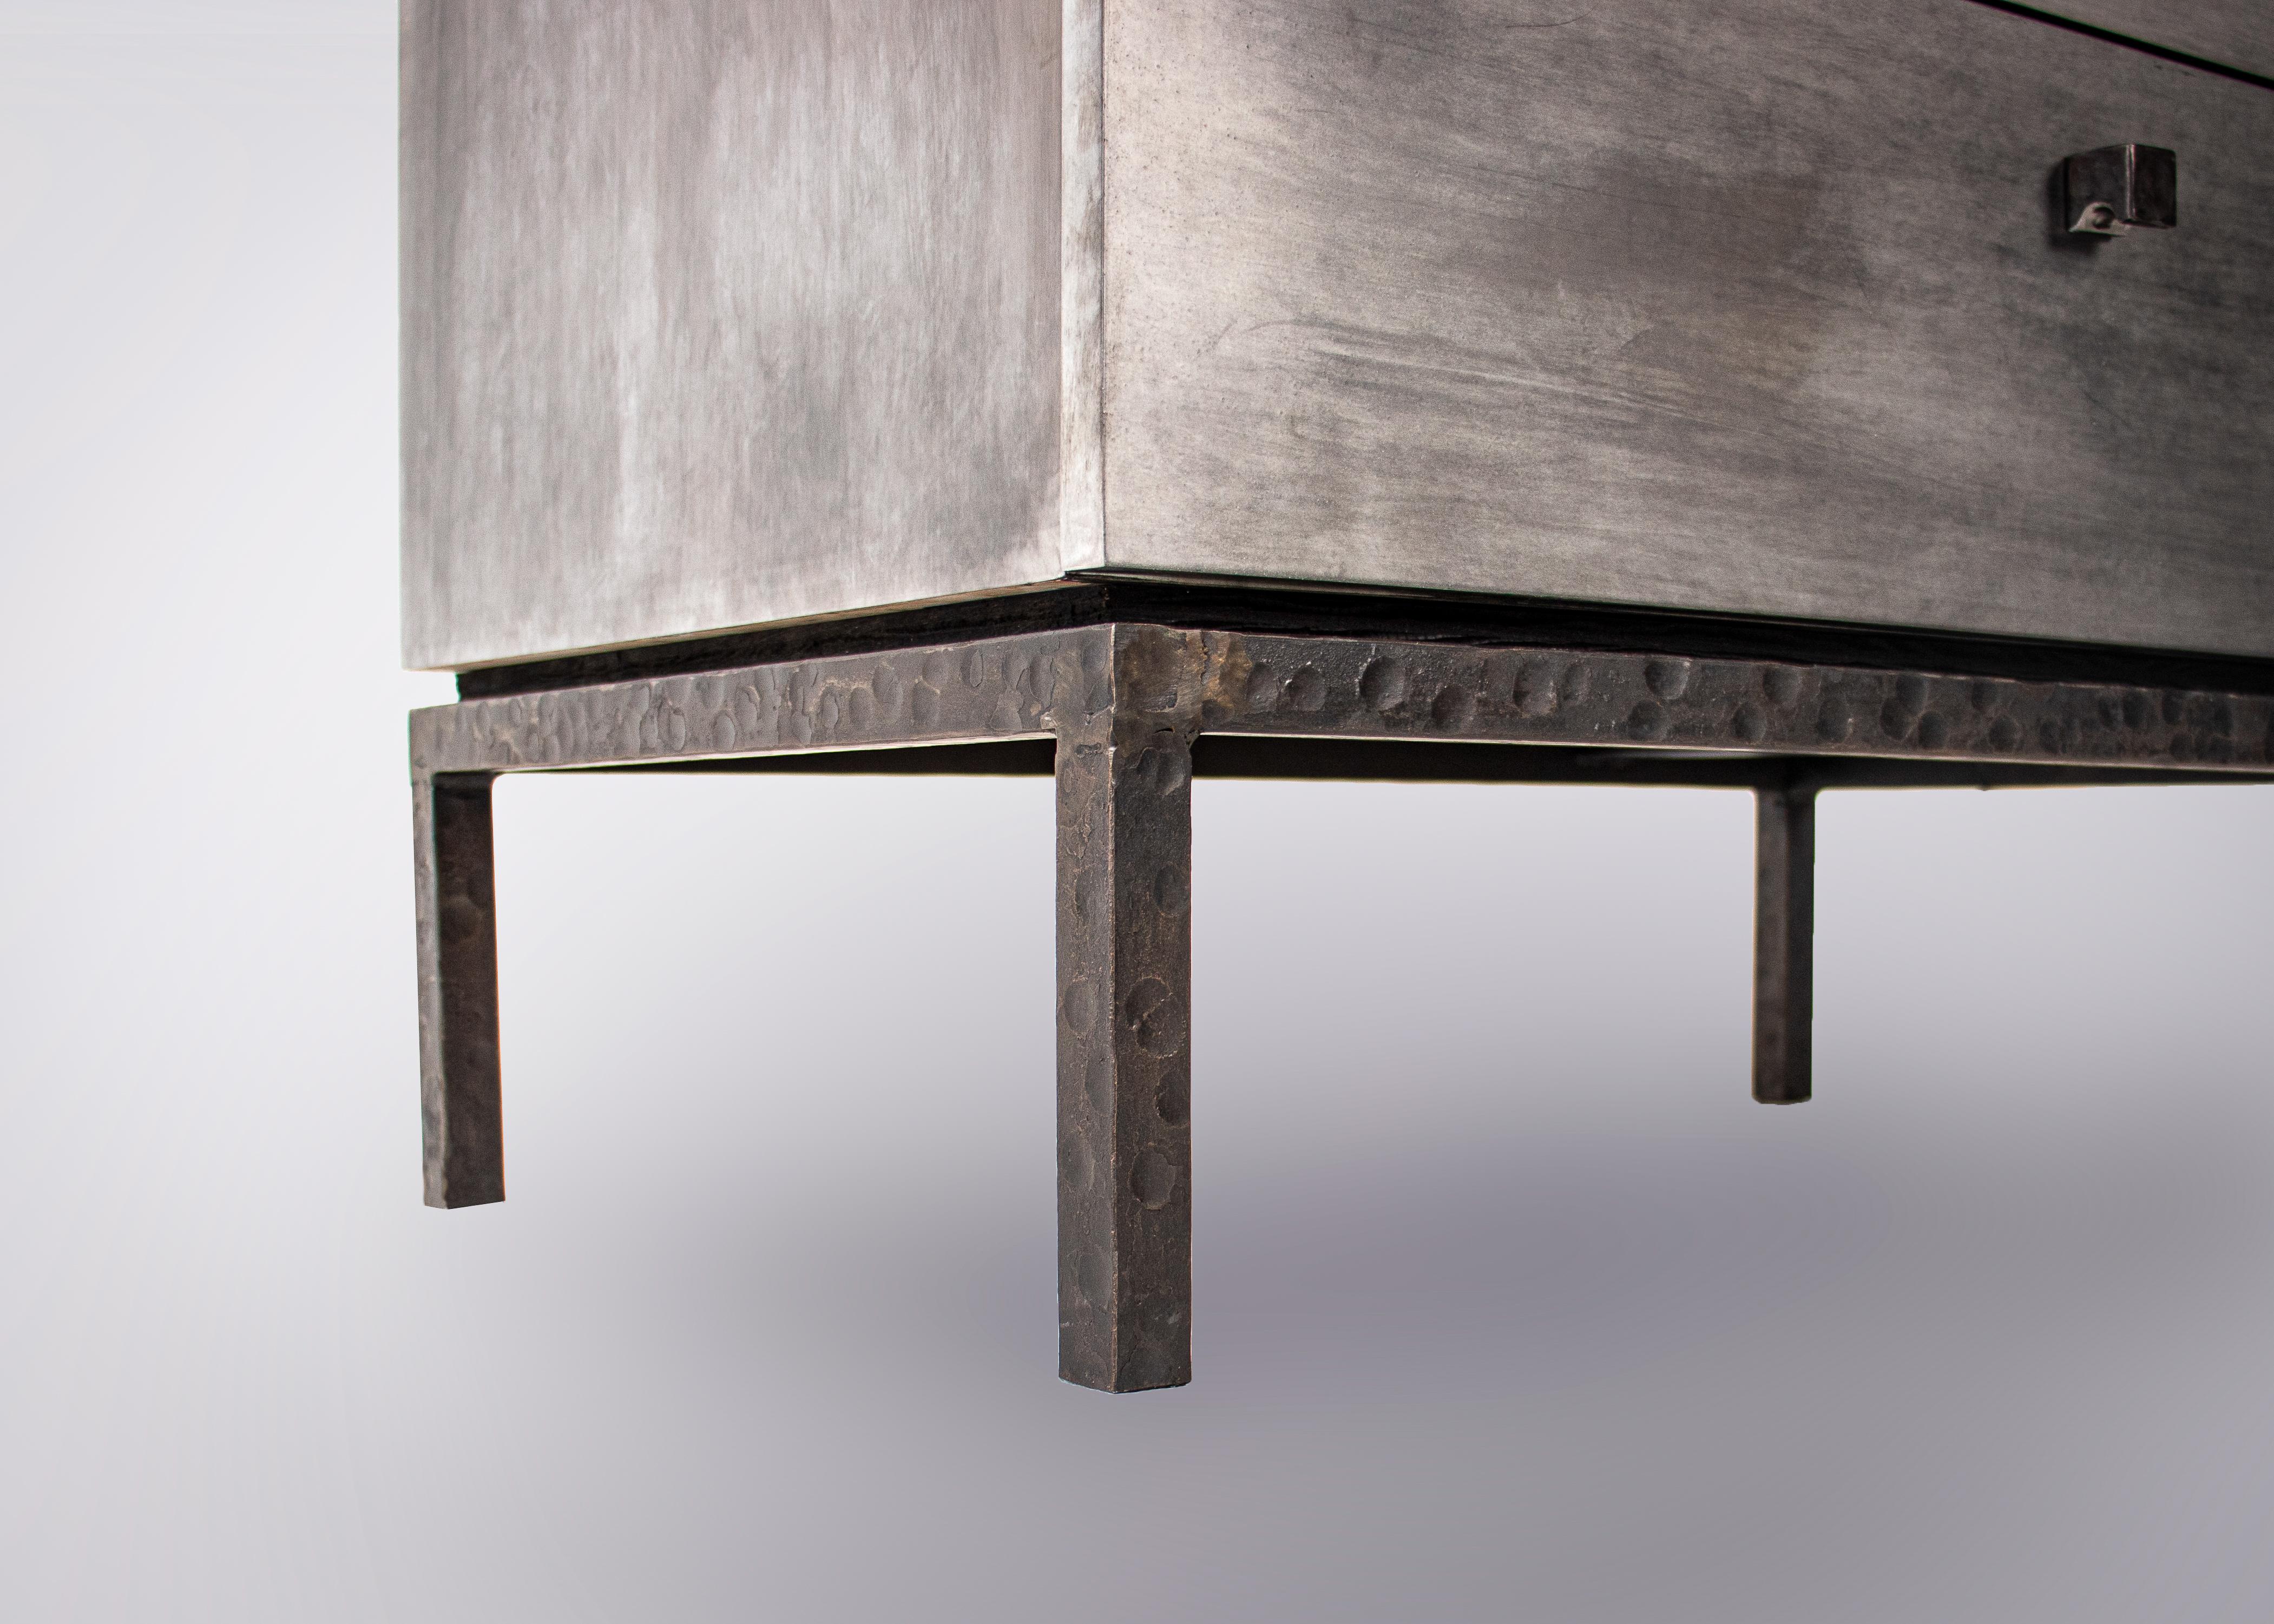 Custom pewter zinc three-drawer bedside table with white oak top on hamemered steel base.